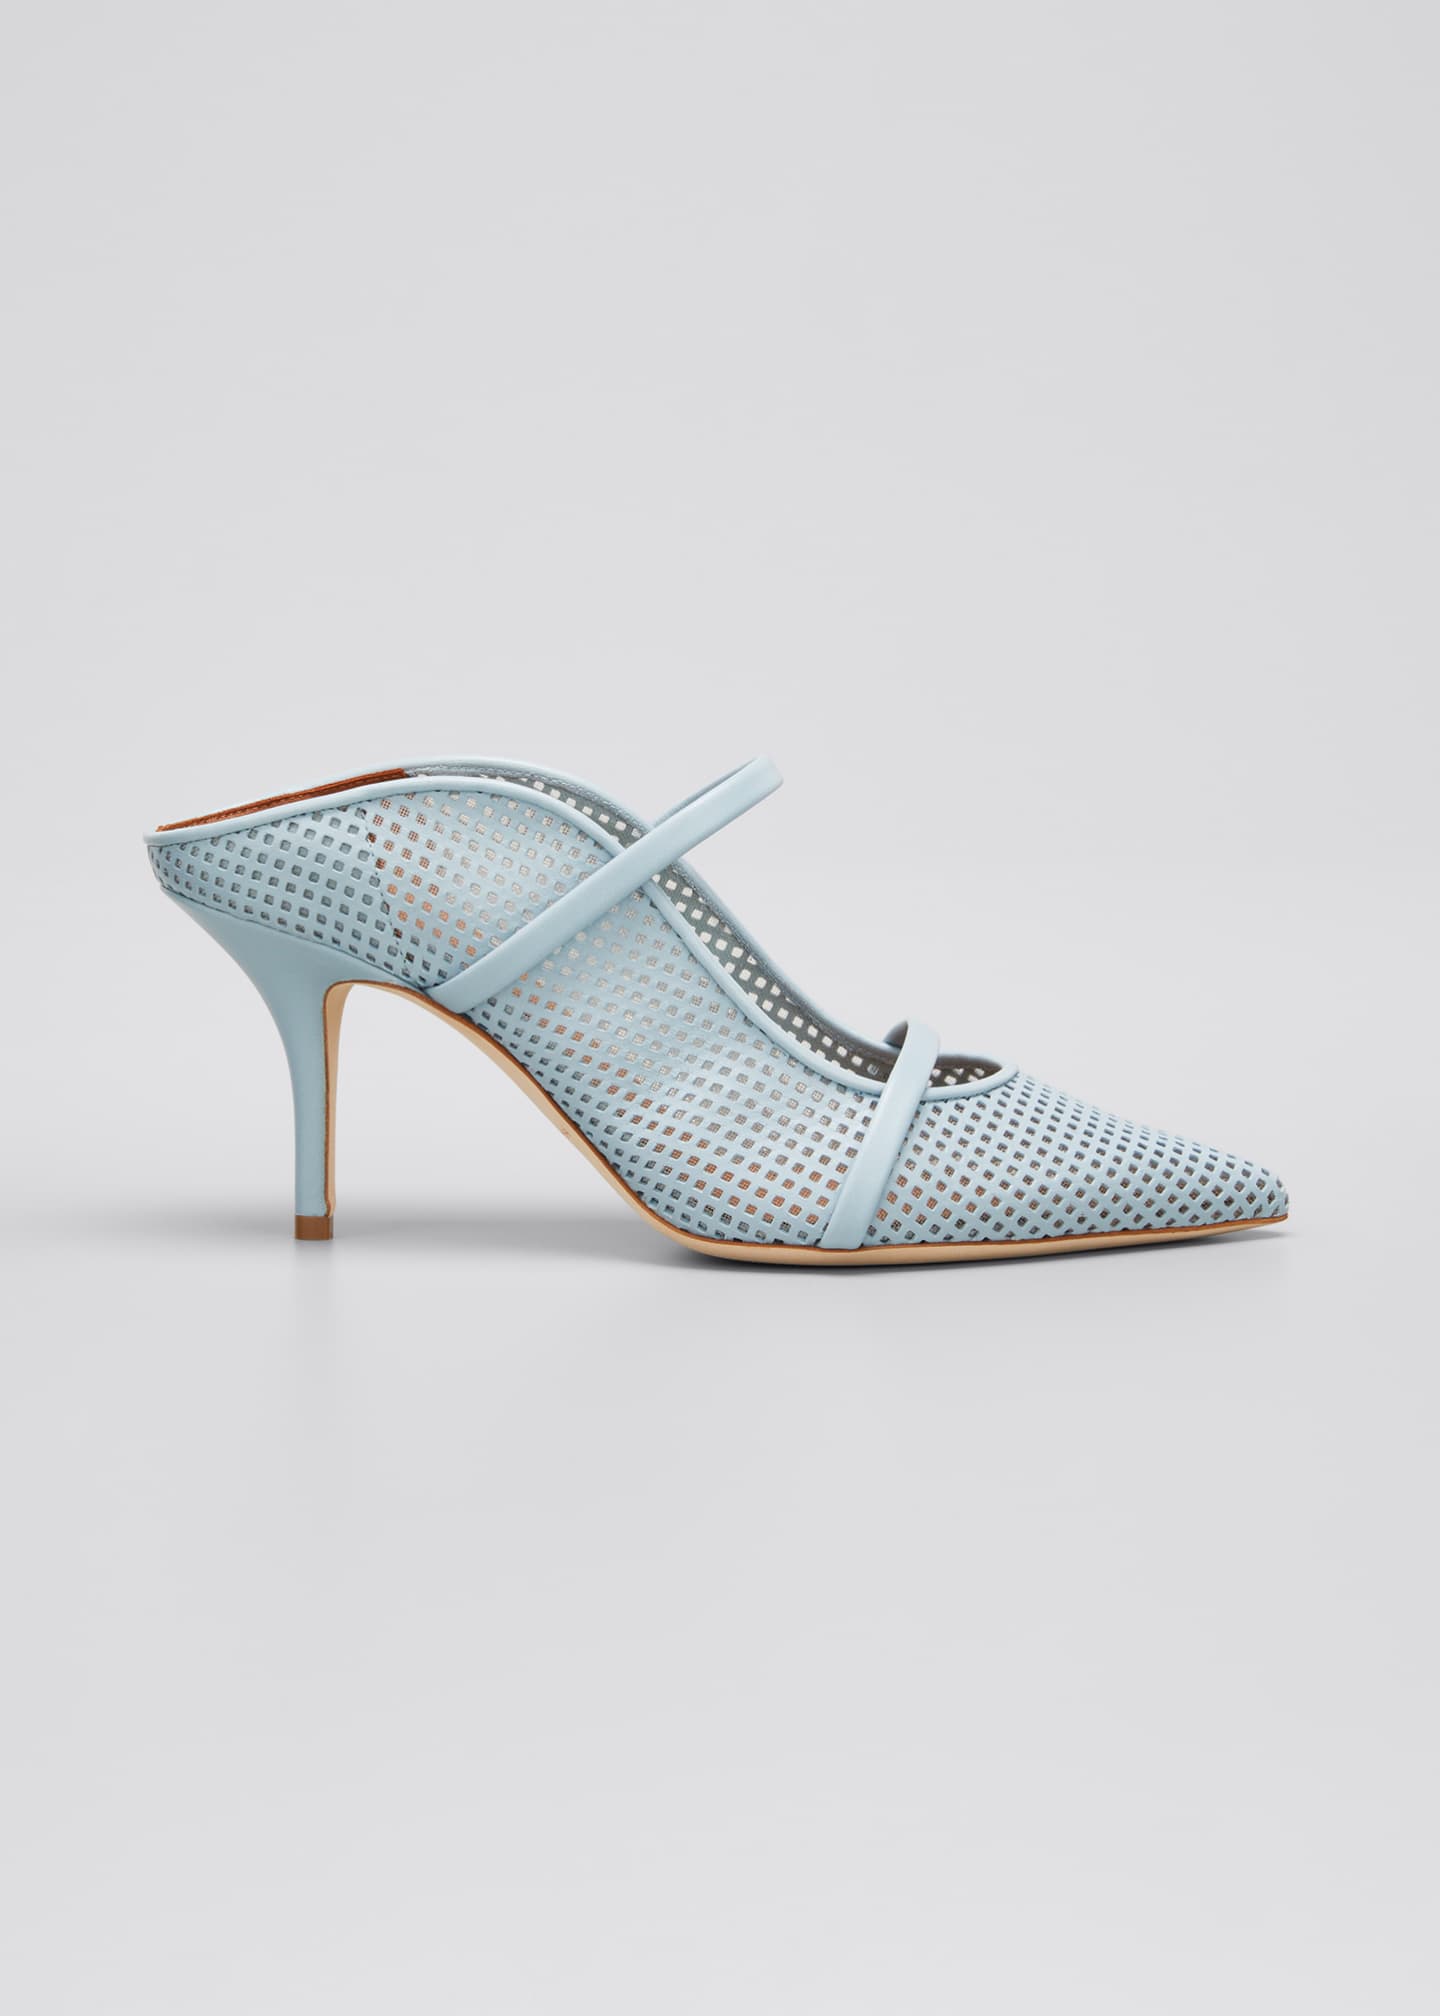 Malone Souliers Maureen 70mm Perforated Leather Mules - Bergdorf Goodman